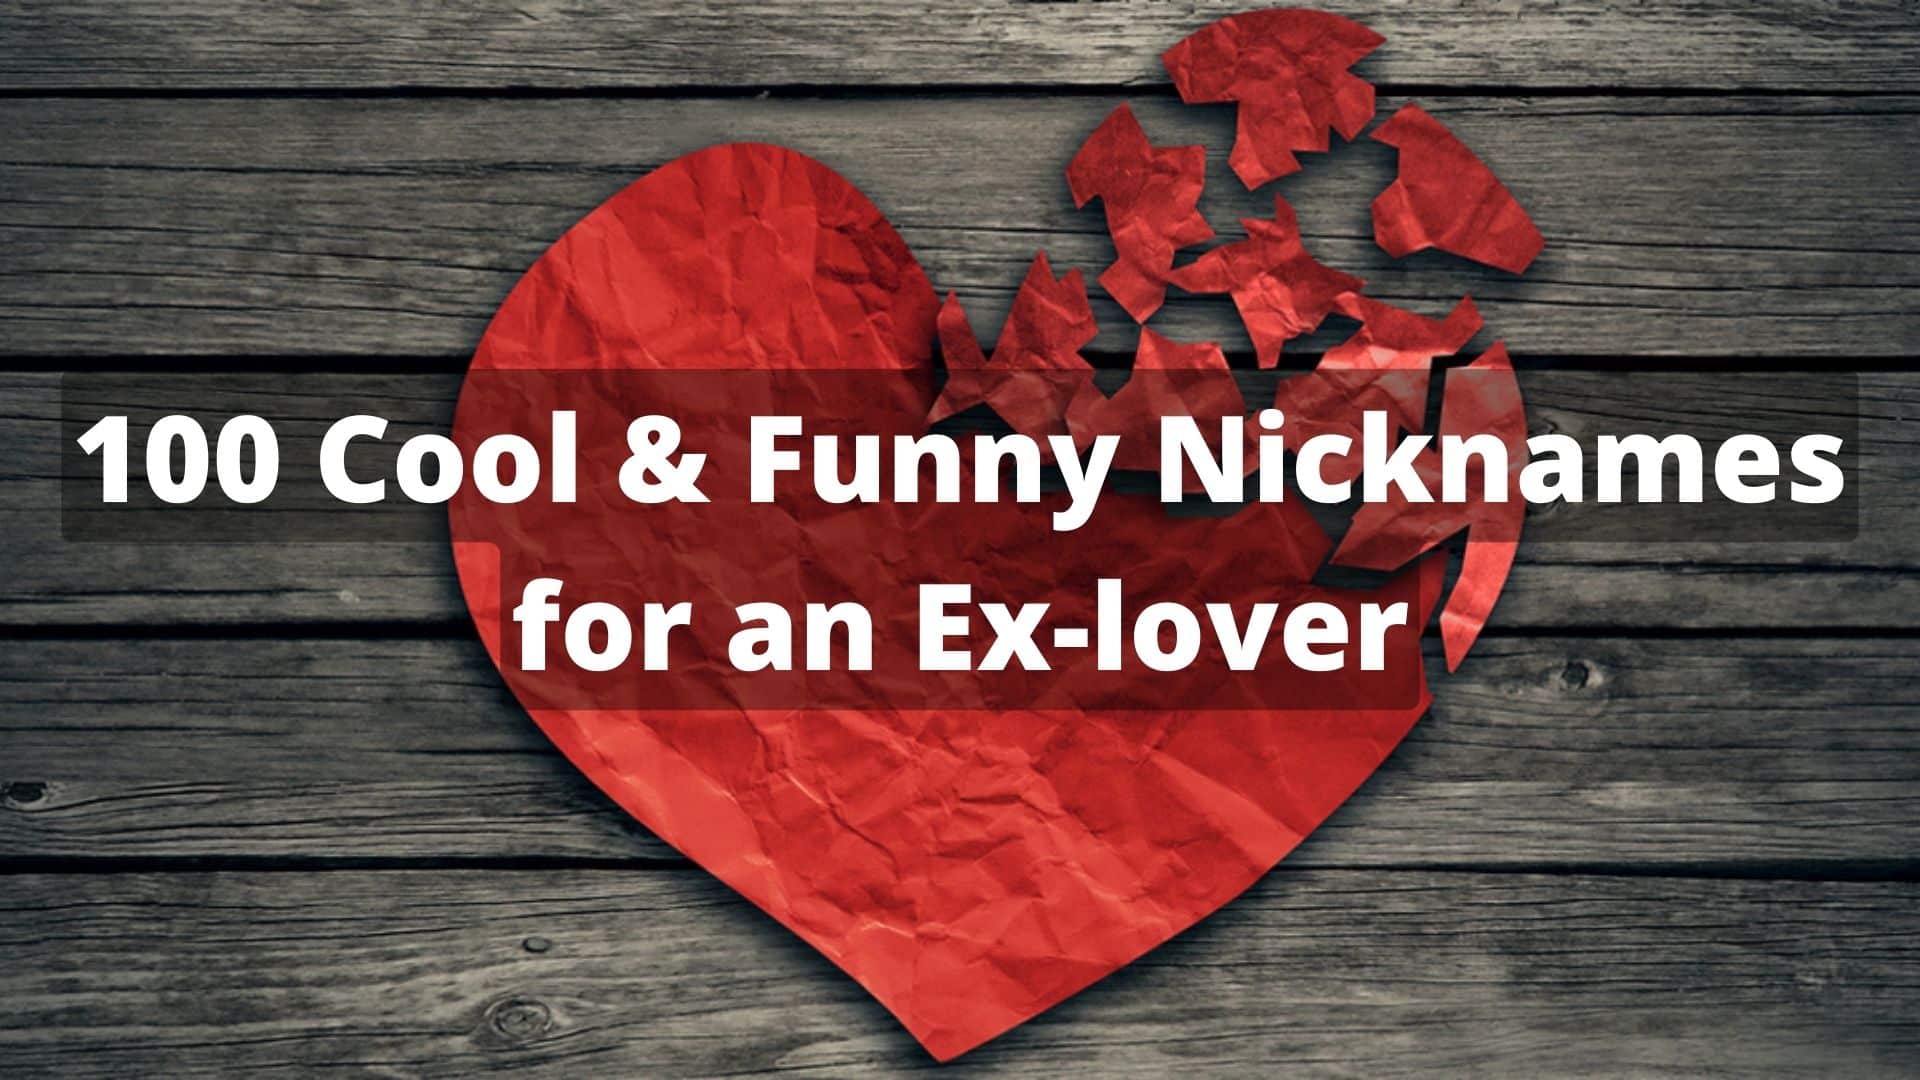 100 Cool & Funny Nicknames for an Ex-lover